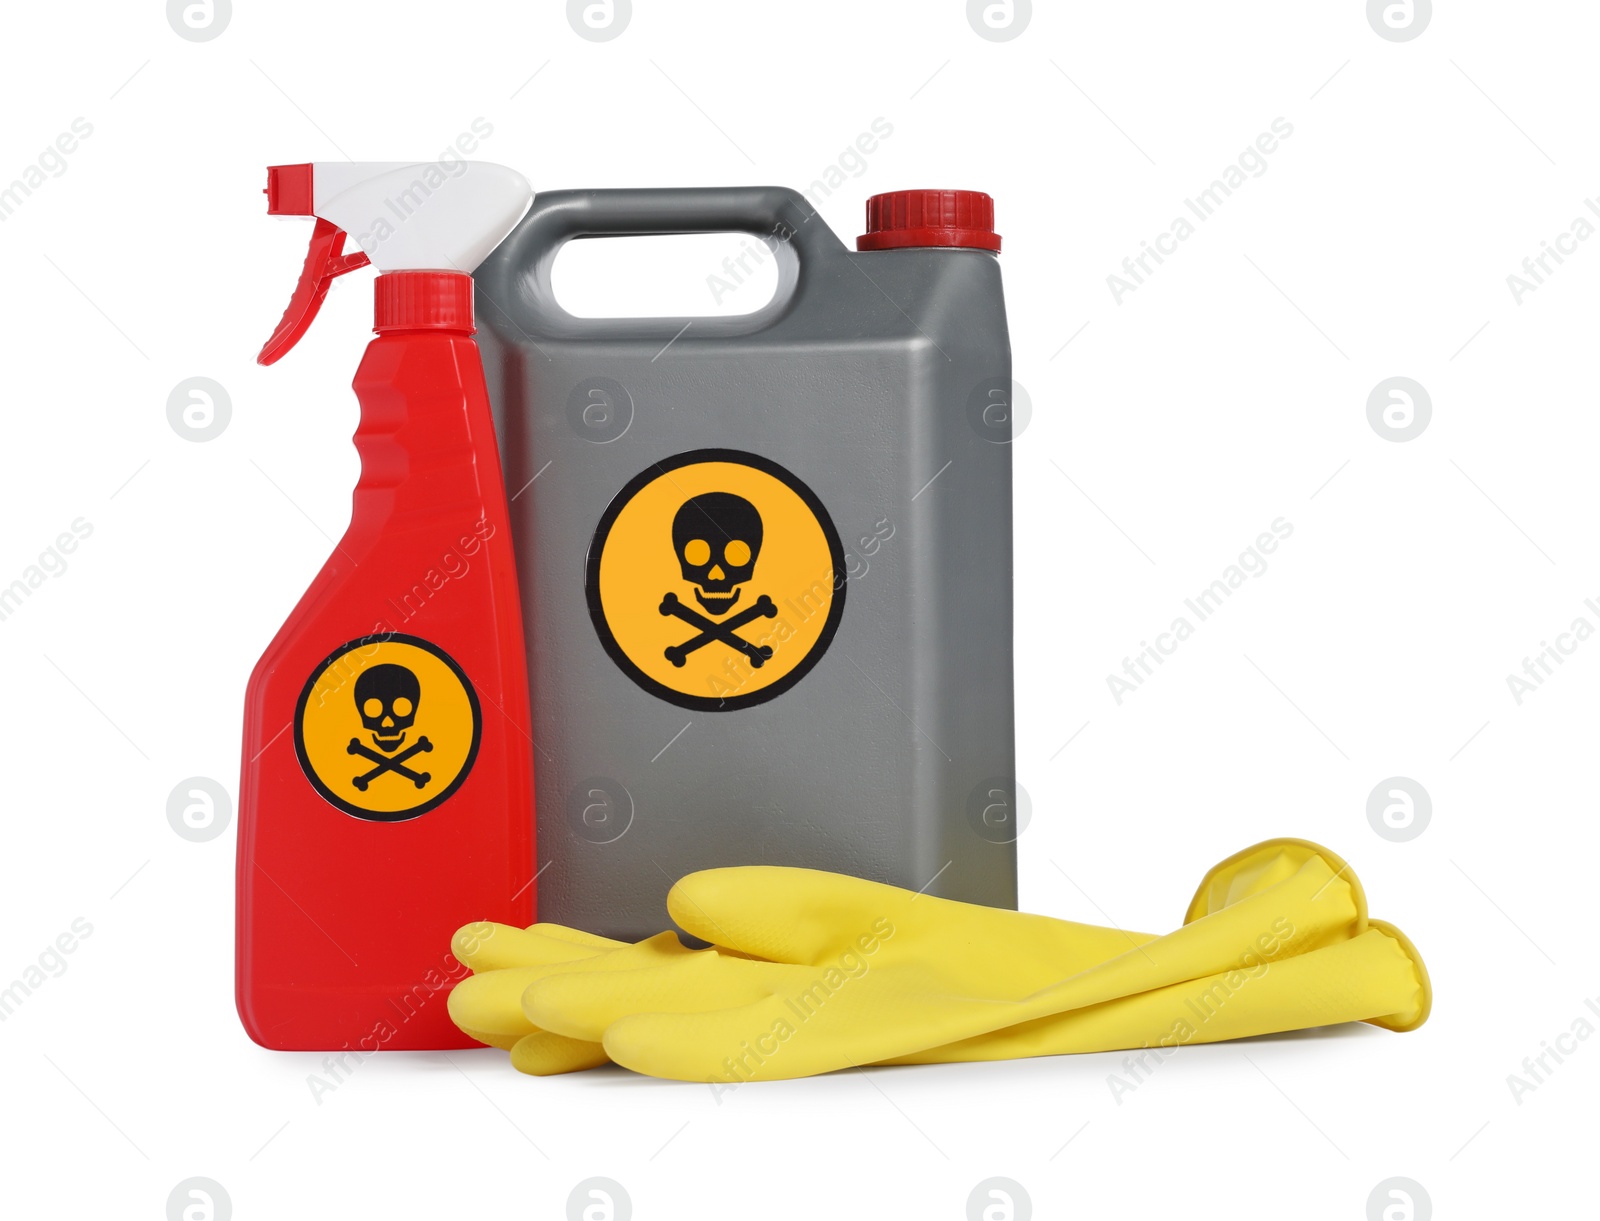 Photo of Bottles of toxic household chemicals with warning signs and rubber gloves on white background